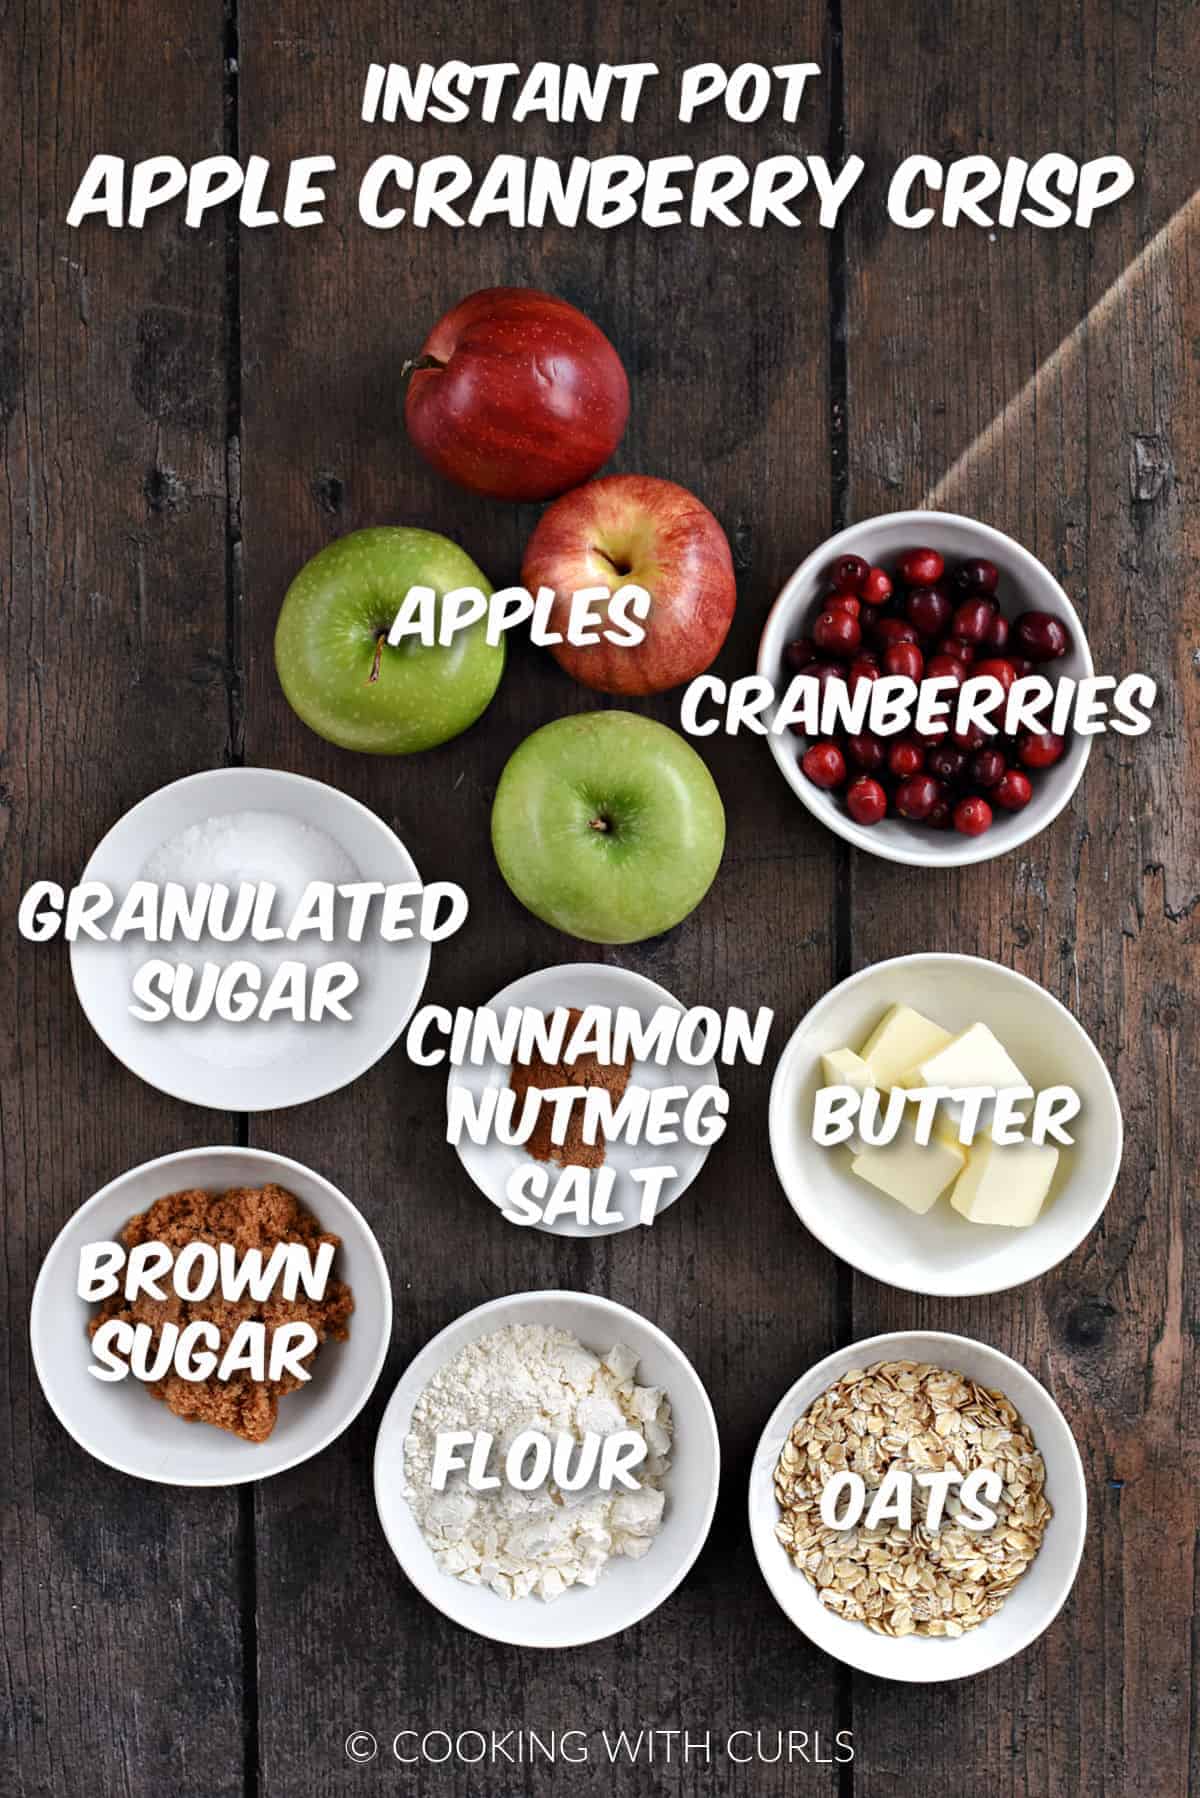 Four apples, cranberries, sugars, butter, flour, oats and seasonings in white bowls. 